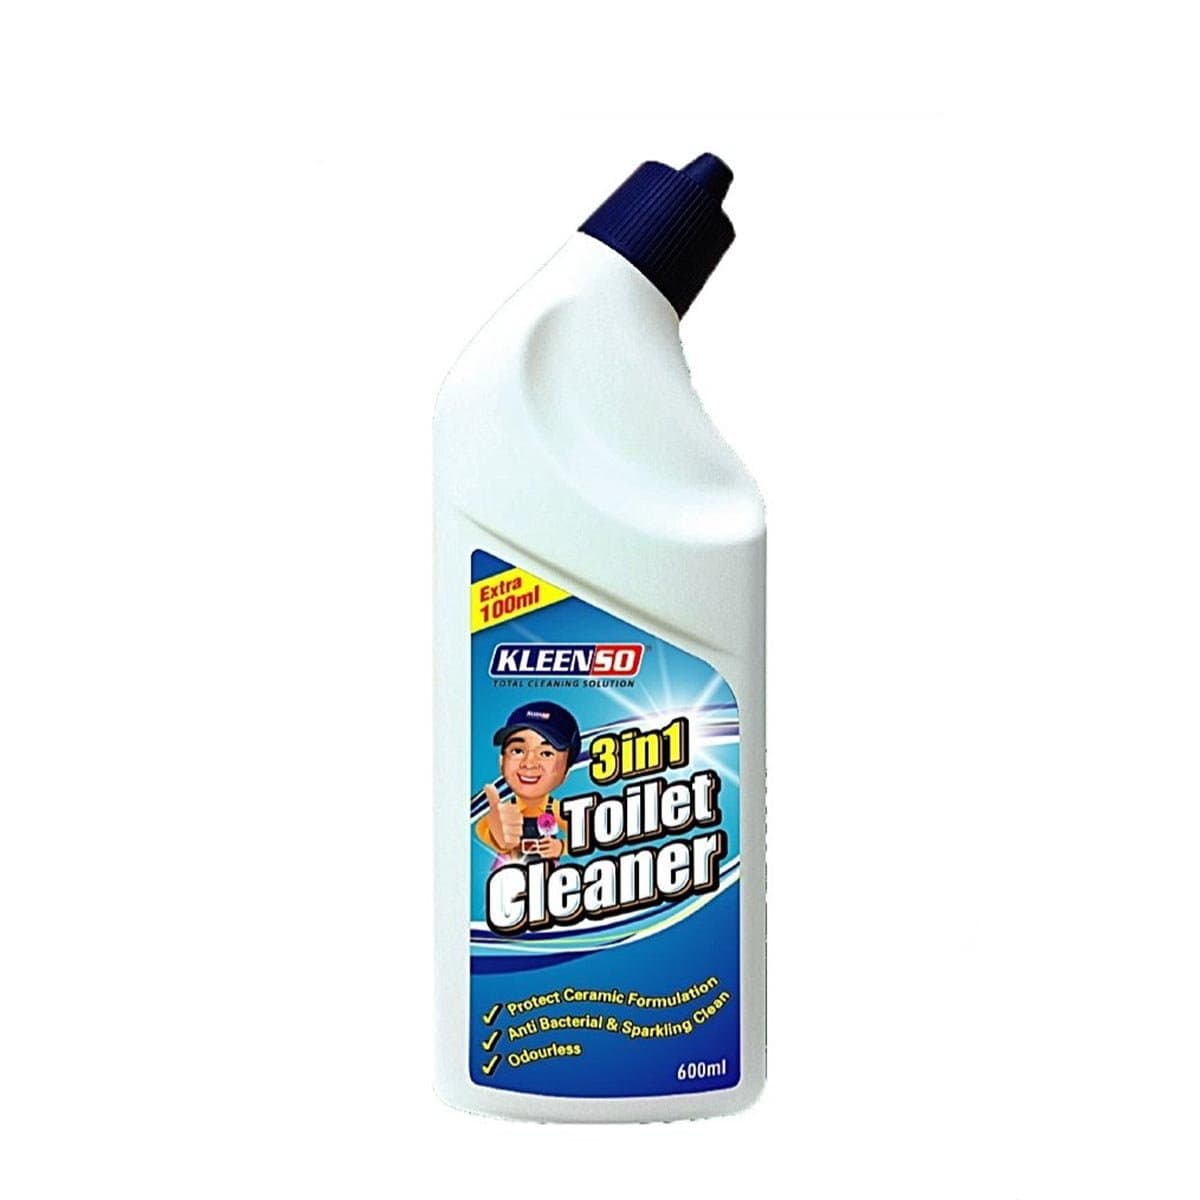 Kleenso 3 in 1 Toilet Cleaner 600ml KHC812